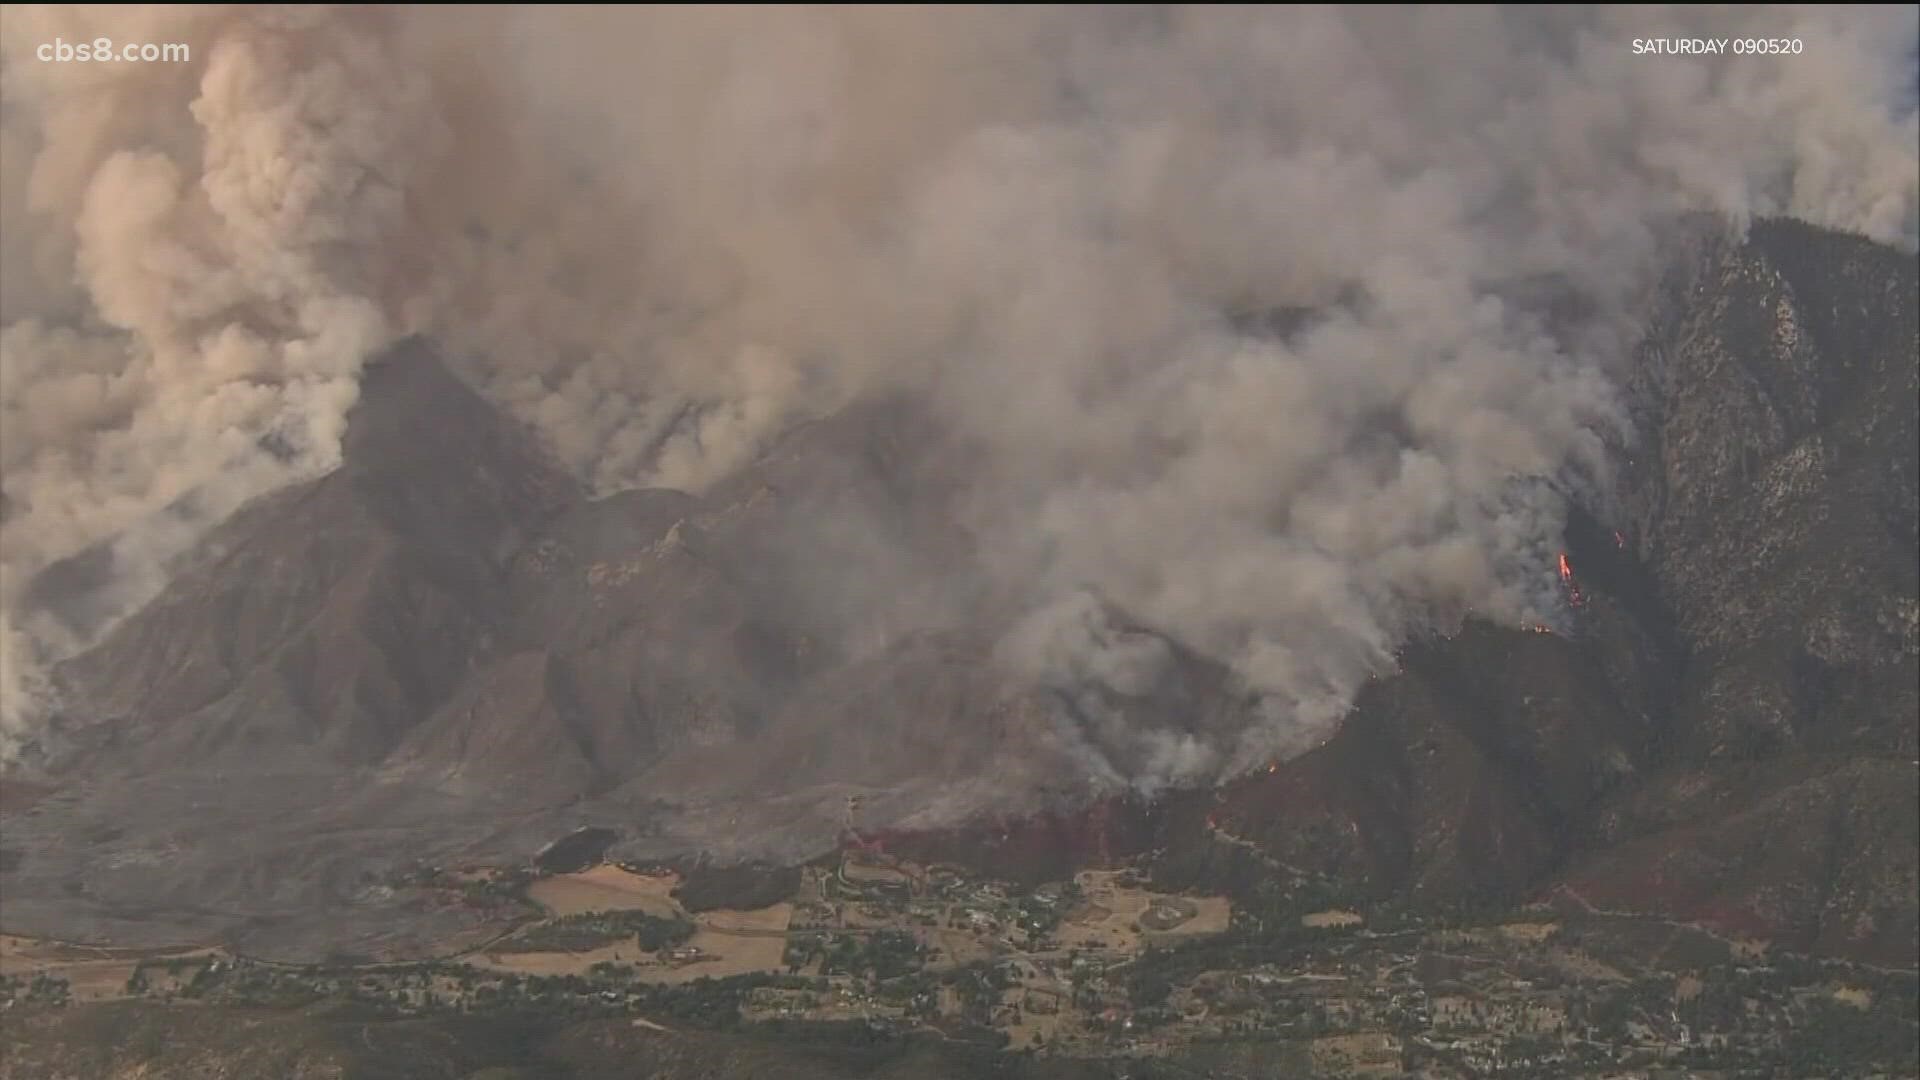 Cal Fire says they are on high alert due to the combination of Santa Ana winds, high temperatures and low humidity.